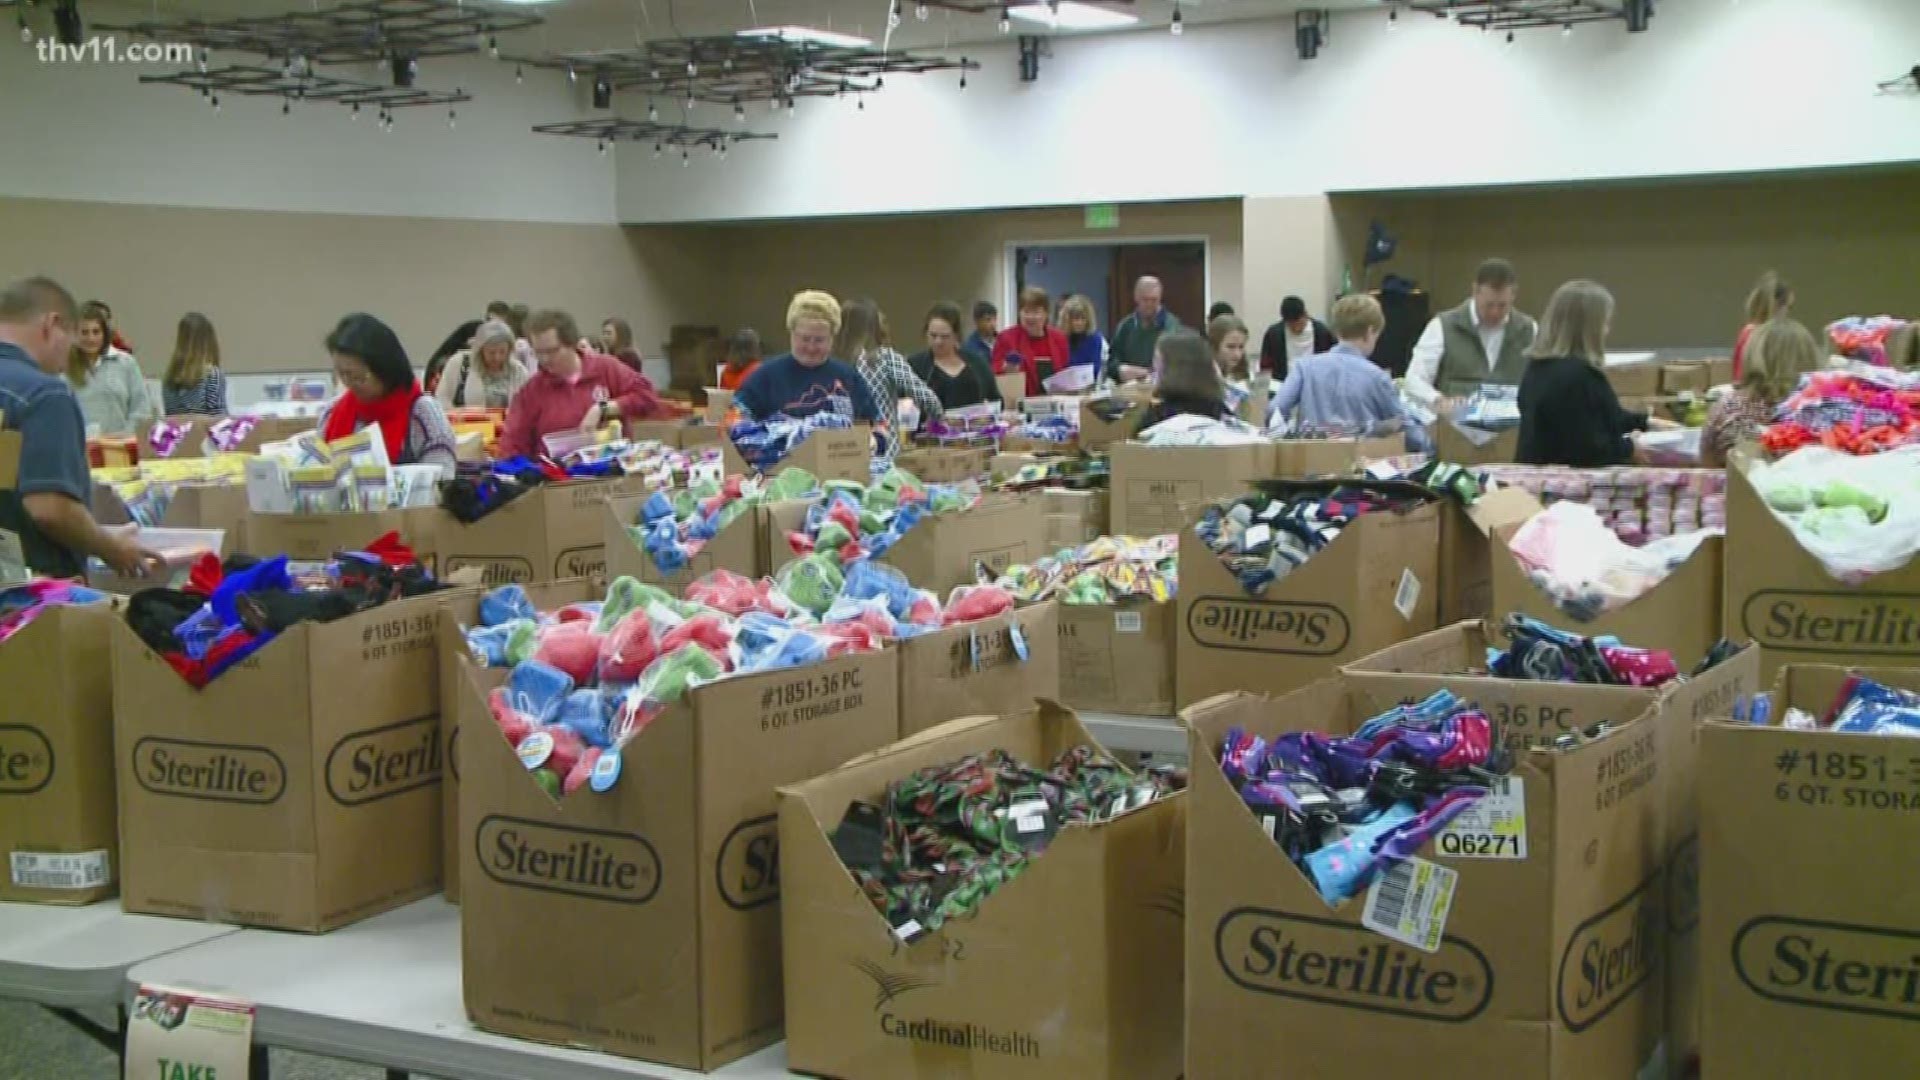 Immanuel Baptist Church is helping spread Holiday Cheer by sending 25-hundred holiday boxes to children in need, all across the globe.